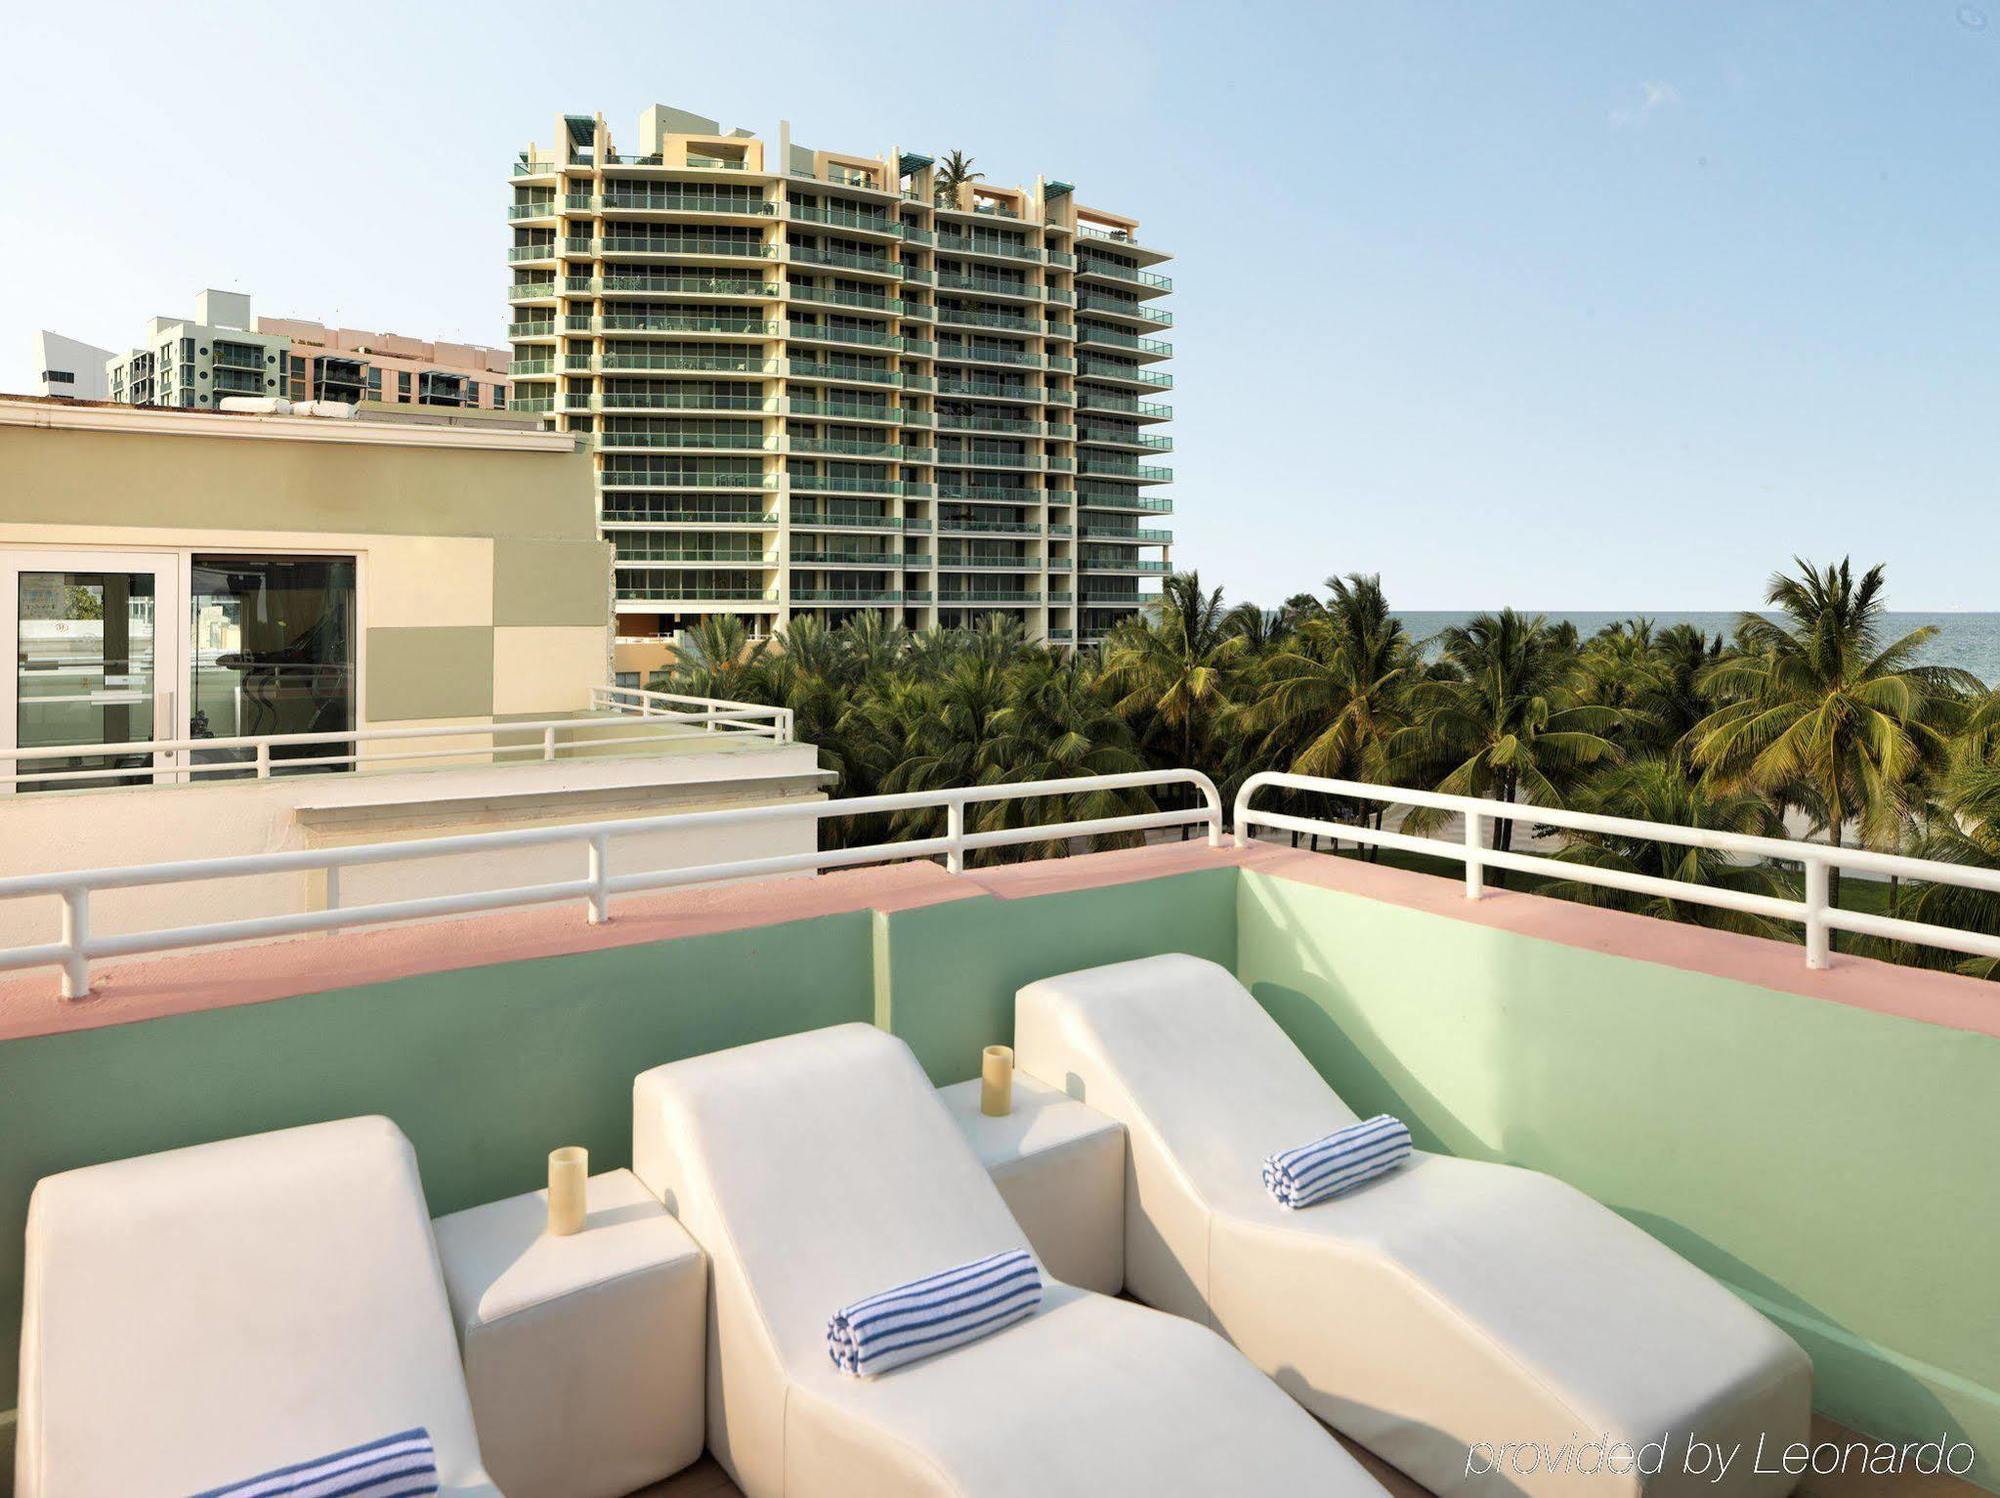 HOTEL HILTON GRAND VACATIONS AT MCALPIN-OCEAN PLAZA MIAMI BEACH, FL 3*  (United States) - from US$ 344 | BOOKED